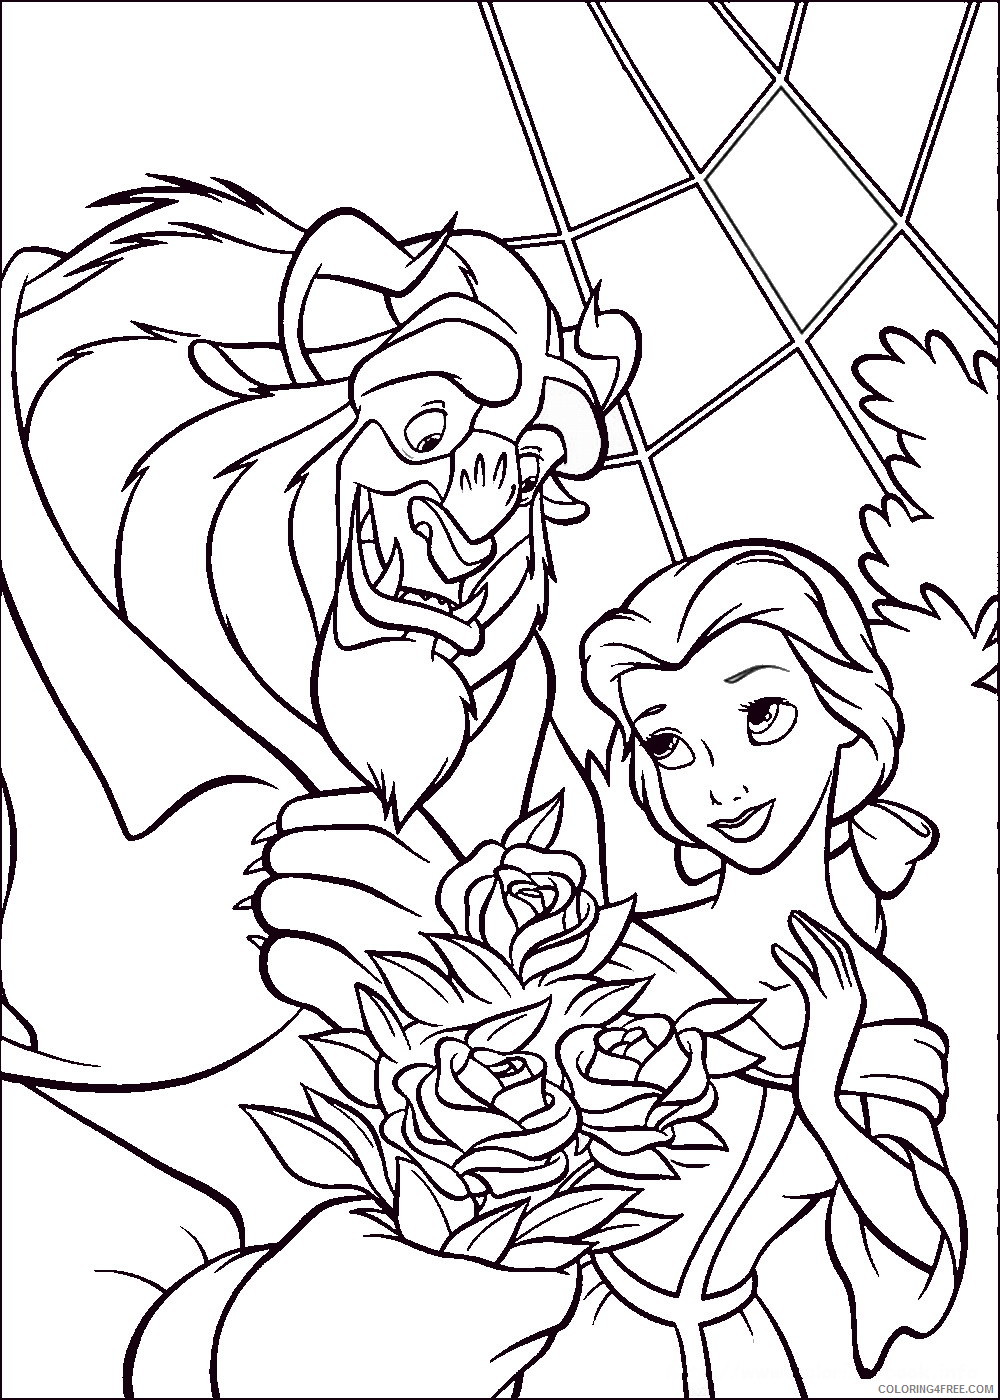 Beauty and the Beast Coloring Pages Cartoons the_beauty_beast_cl_09 Printable 2020 1183 Coloring4free